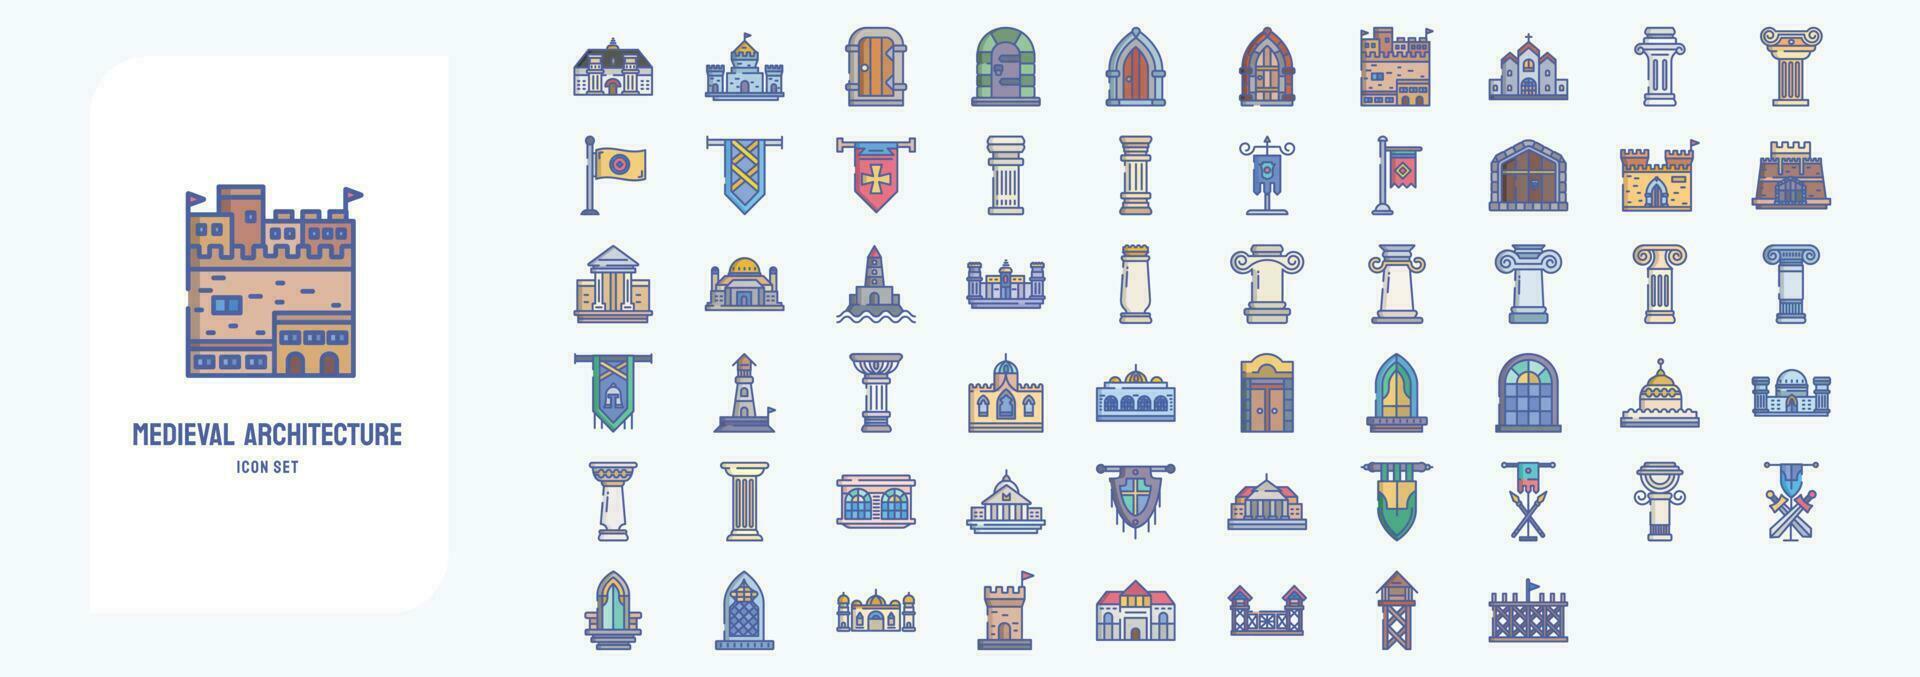 Medieval architecture, including icons like Castle, Corinthian pillar, Fort, Palace and more vector